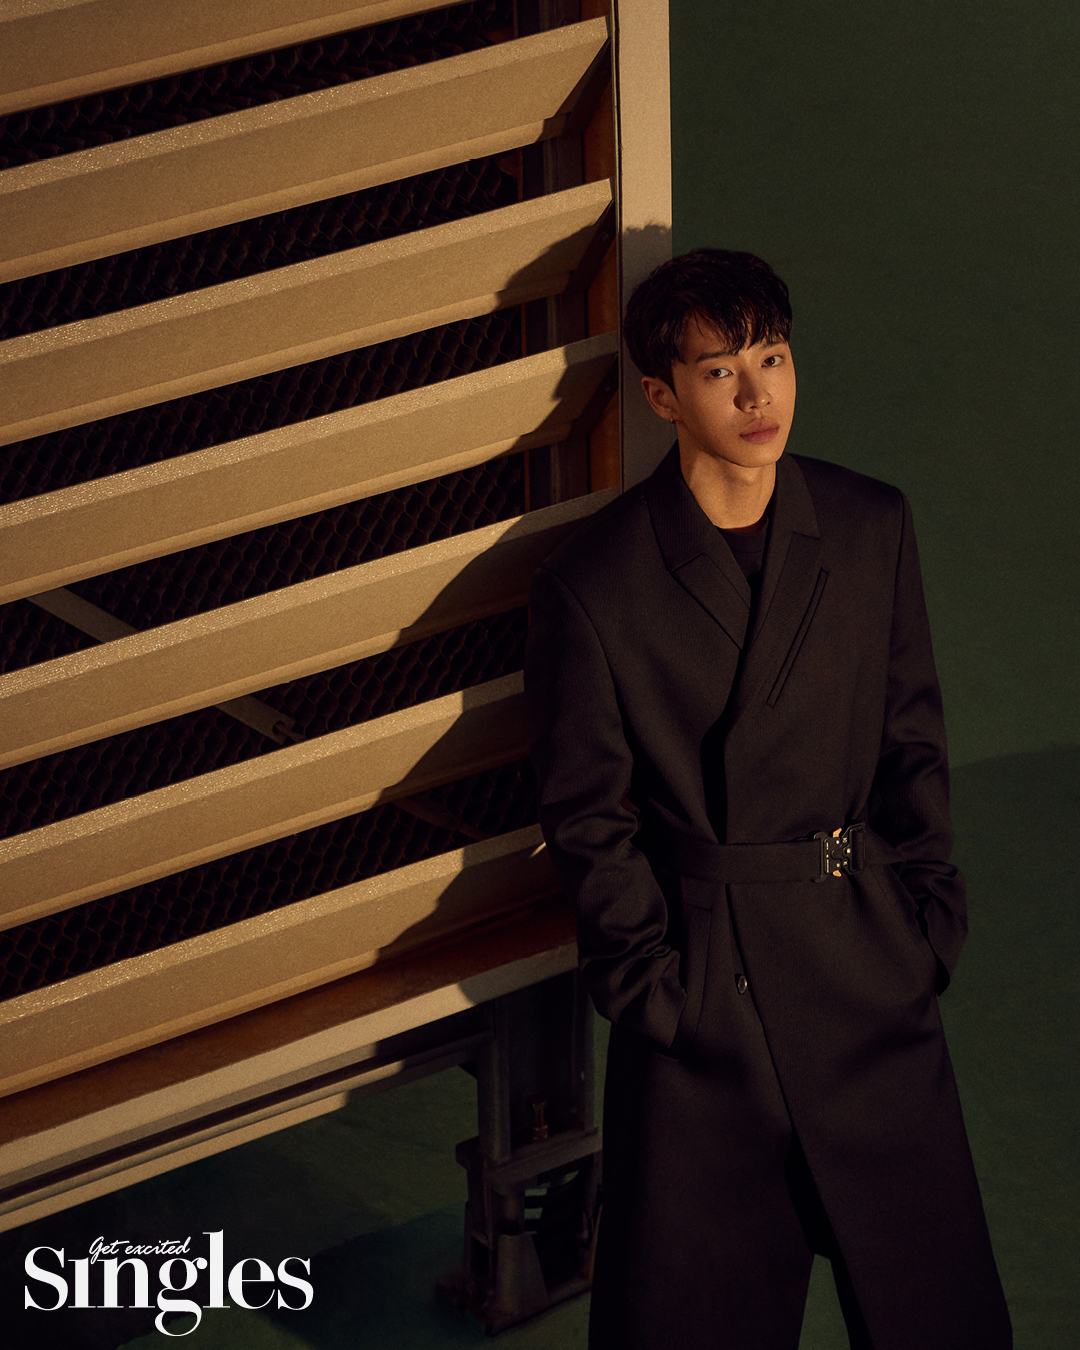 The first picture after the Discharge of Highlight Lee Gi-kwang has been released.Lifestyle magazine Singles released a visual picture of the group Highlight Lee Gi-kwang, which returned to a more masculine appearance after completing its duty of defense on the 18th.Lee Gi-kwang has released a brilliant visual and a solid abdominal muscle without a fuss, which is about two years away, and completed the picture with an unreachable man aura.Despite the first shooting since the discharge, he showed a pose and eyes that overwhelmed the camera, and showed off the veteran Idol of his 11th year of debut.Lee Gi-kwang of Highlight, who has stolen the hearts of domestic and global fans in the past as Asias No. 1 handsome man, has returned to the third of the members after Yoon Doo-joon and Yang Yo-seob.I was originally happy with the small thing, but I am more happy to go to the army.I am grateful for not being so big, I am impressed and happy with small things. Lee Gi-kwang, who had time to look at himself during his military life, said, I thought that my job was special, and that I was not special at all.I have a special job, so I have a bigger desire to work harder after being discharged, he said, expressing his sense of responsibility and responsibility for the job as an entertainer.Lee Gi-kwang, who chose to meet with fans as the moment he missed the military service, said, I miss the process of preparing the concert, the moment I meet with the fans on stage, the hard work staff after the concert and the meeting of Oh Soon-do.Lee Gi-kwang, who has released his own songs through the sound cloud, wrote 30 fan letters for fans, and collected topics with unusual fan love, said, I think it is really great to express love, support and like to others without reason.It seems like an obvious answer, but I am always grateful to my fans. Highlight Lee Gi-kwangs fatal pictures and interviews can be found in the December issue of Singles and on the fun online playground Singles mobile.Photos/Singles